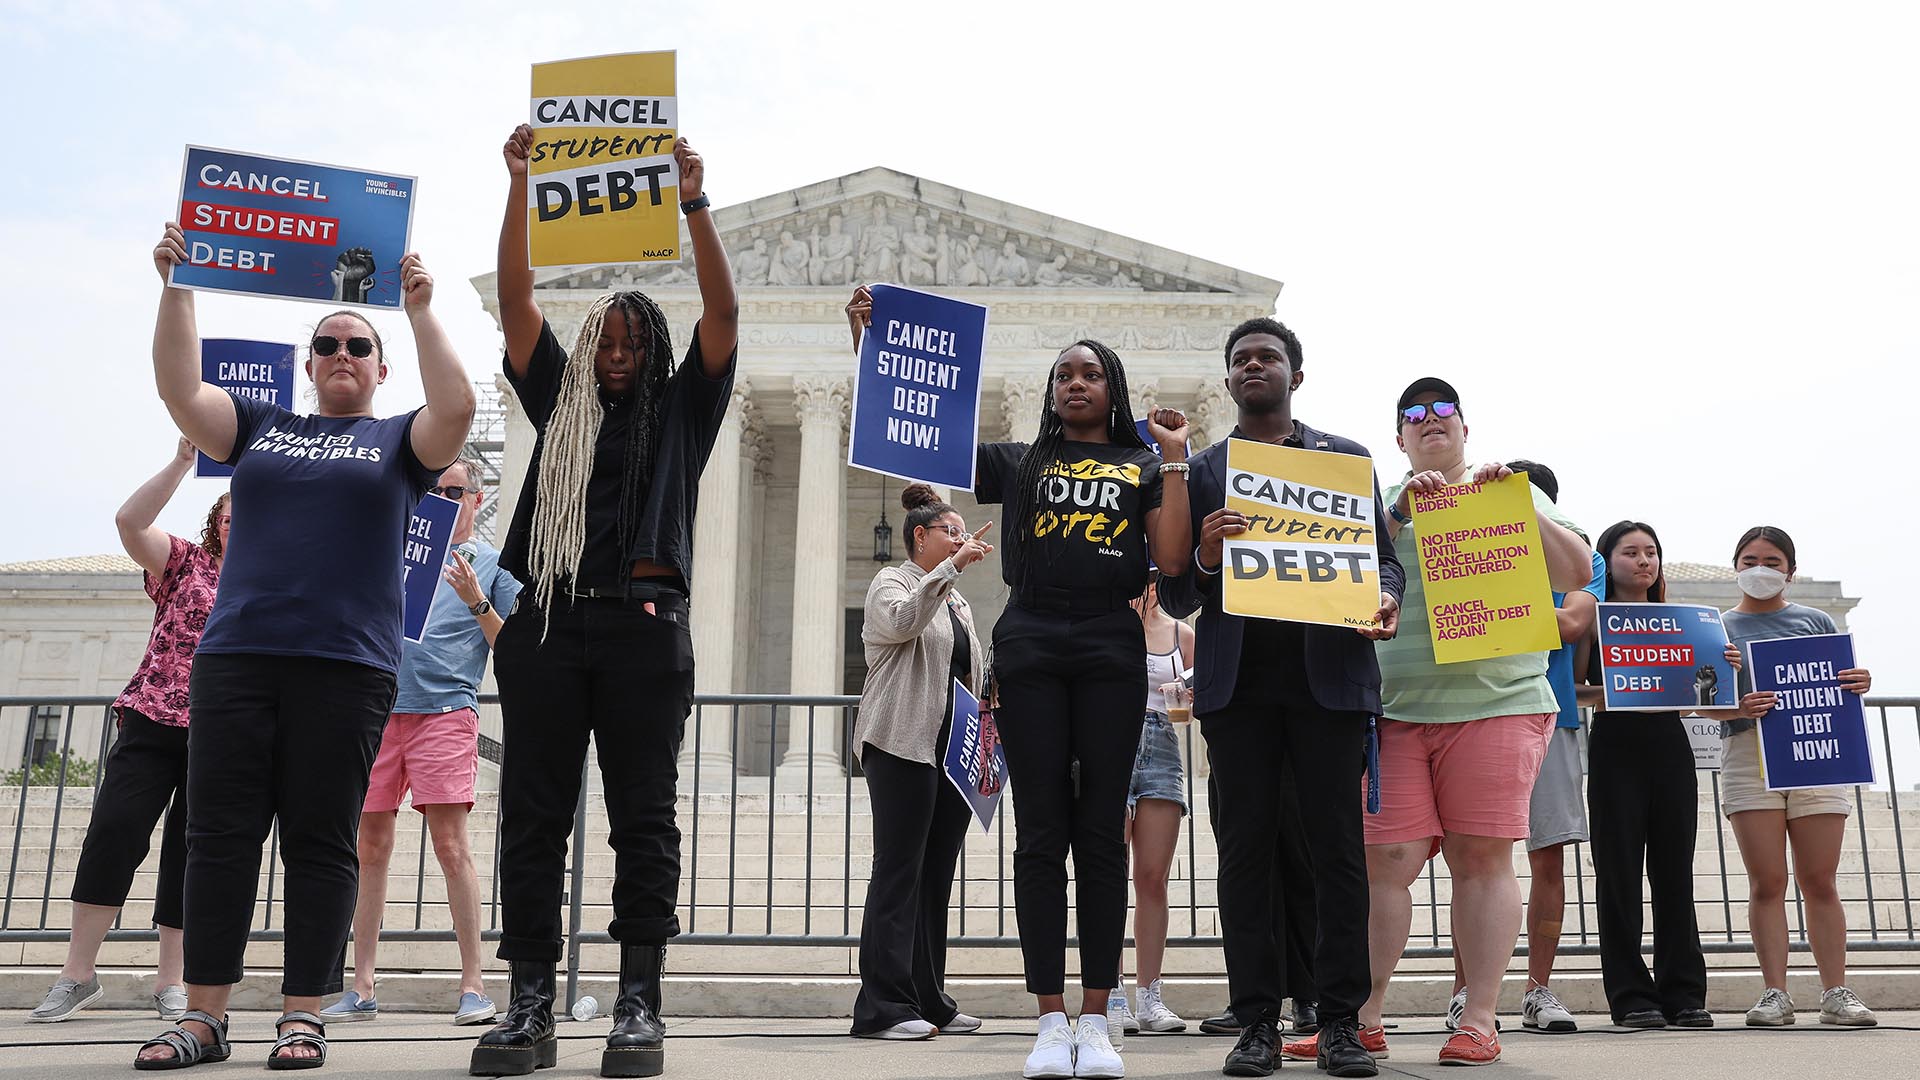 Student debt relief activists participate in a rally at the U.S. Supreme Court